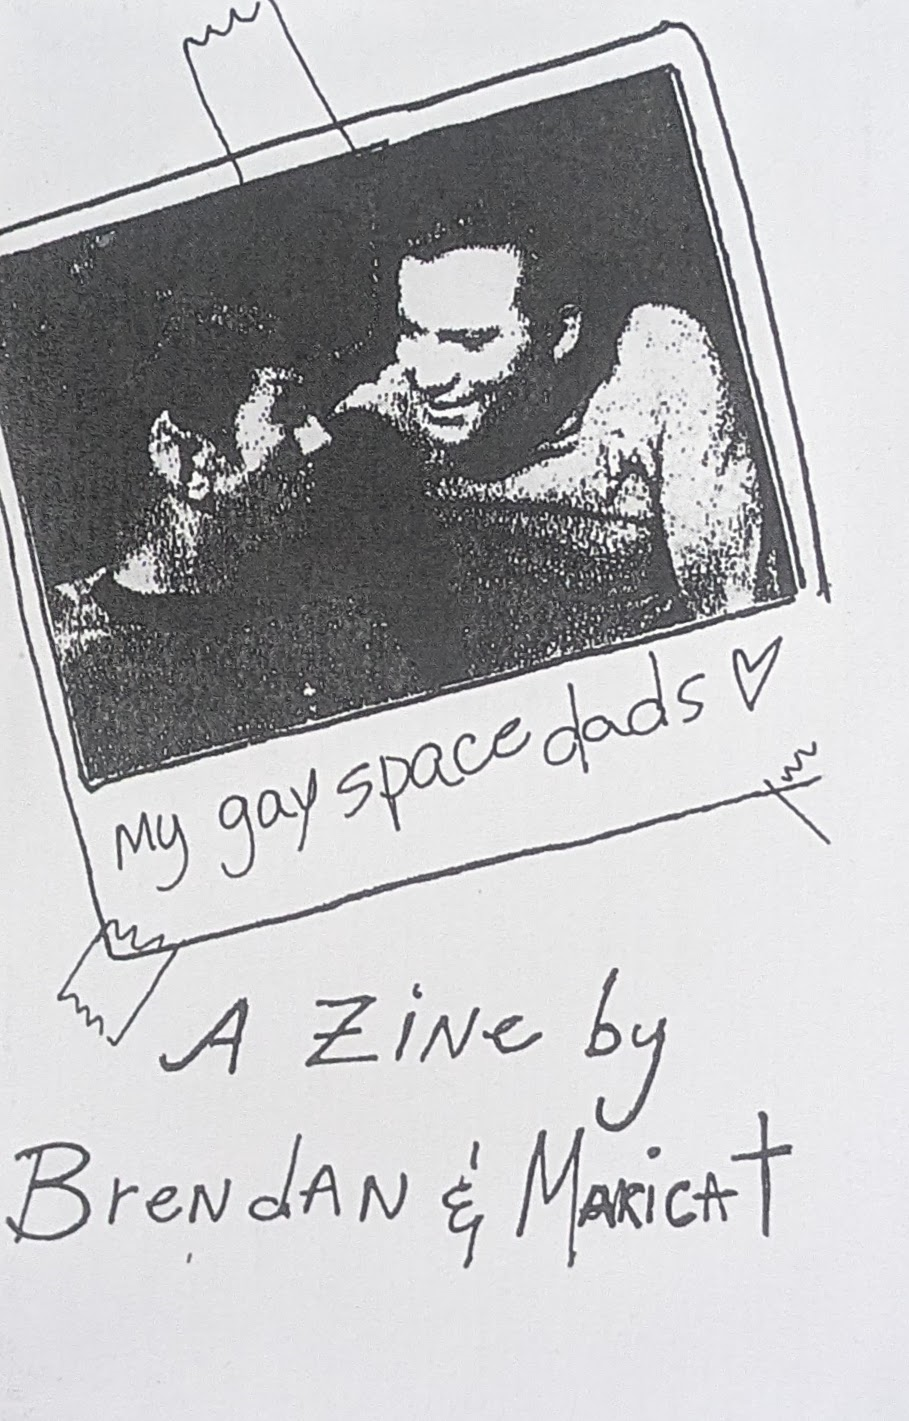 The cover of the zine “My Gay Space Dads.” A collage of Kirk and Spock.